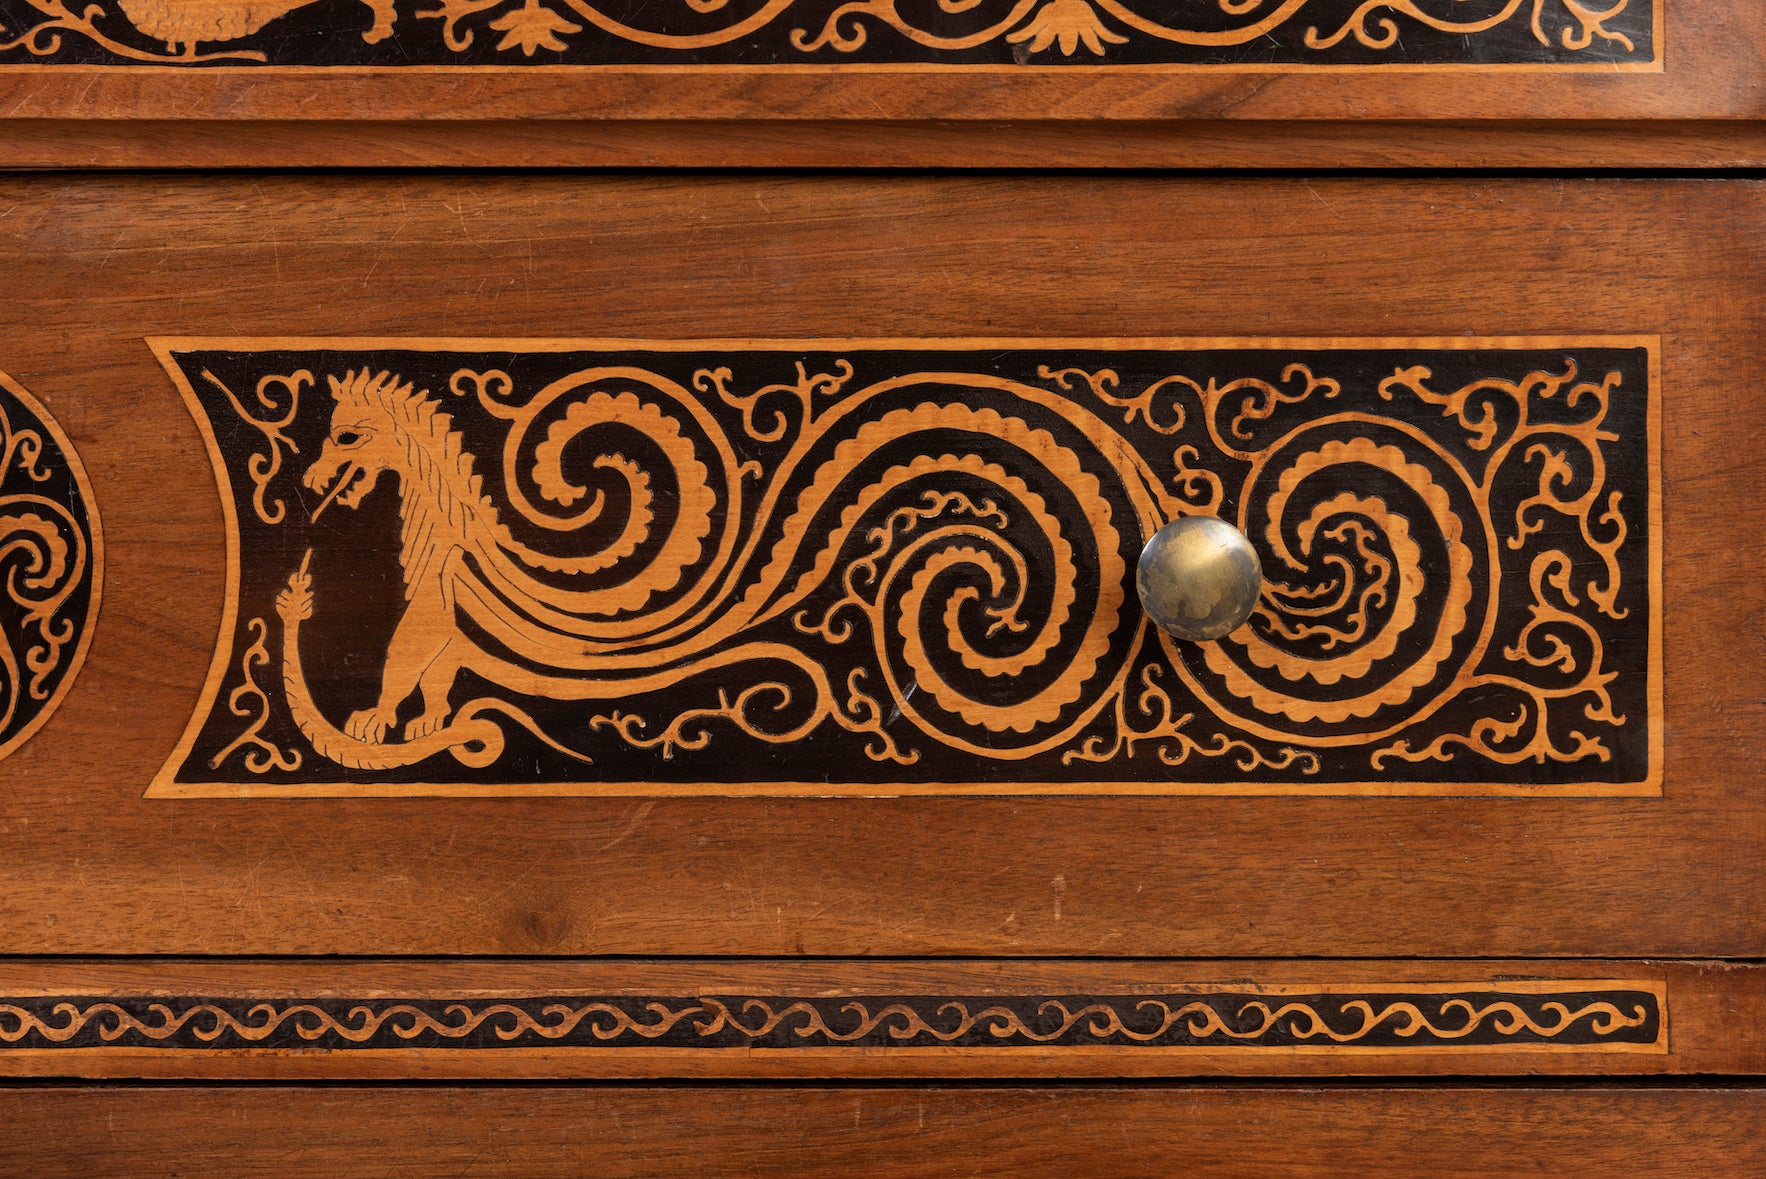 SOLD A very fine marquetry walnut straight-front commode, Italian Circa 1845